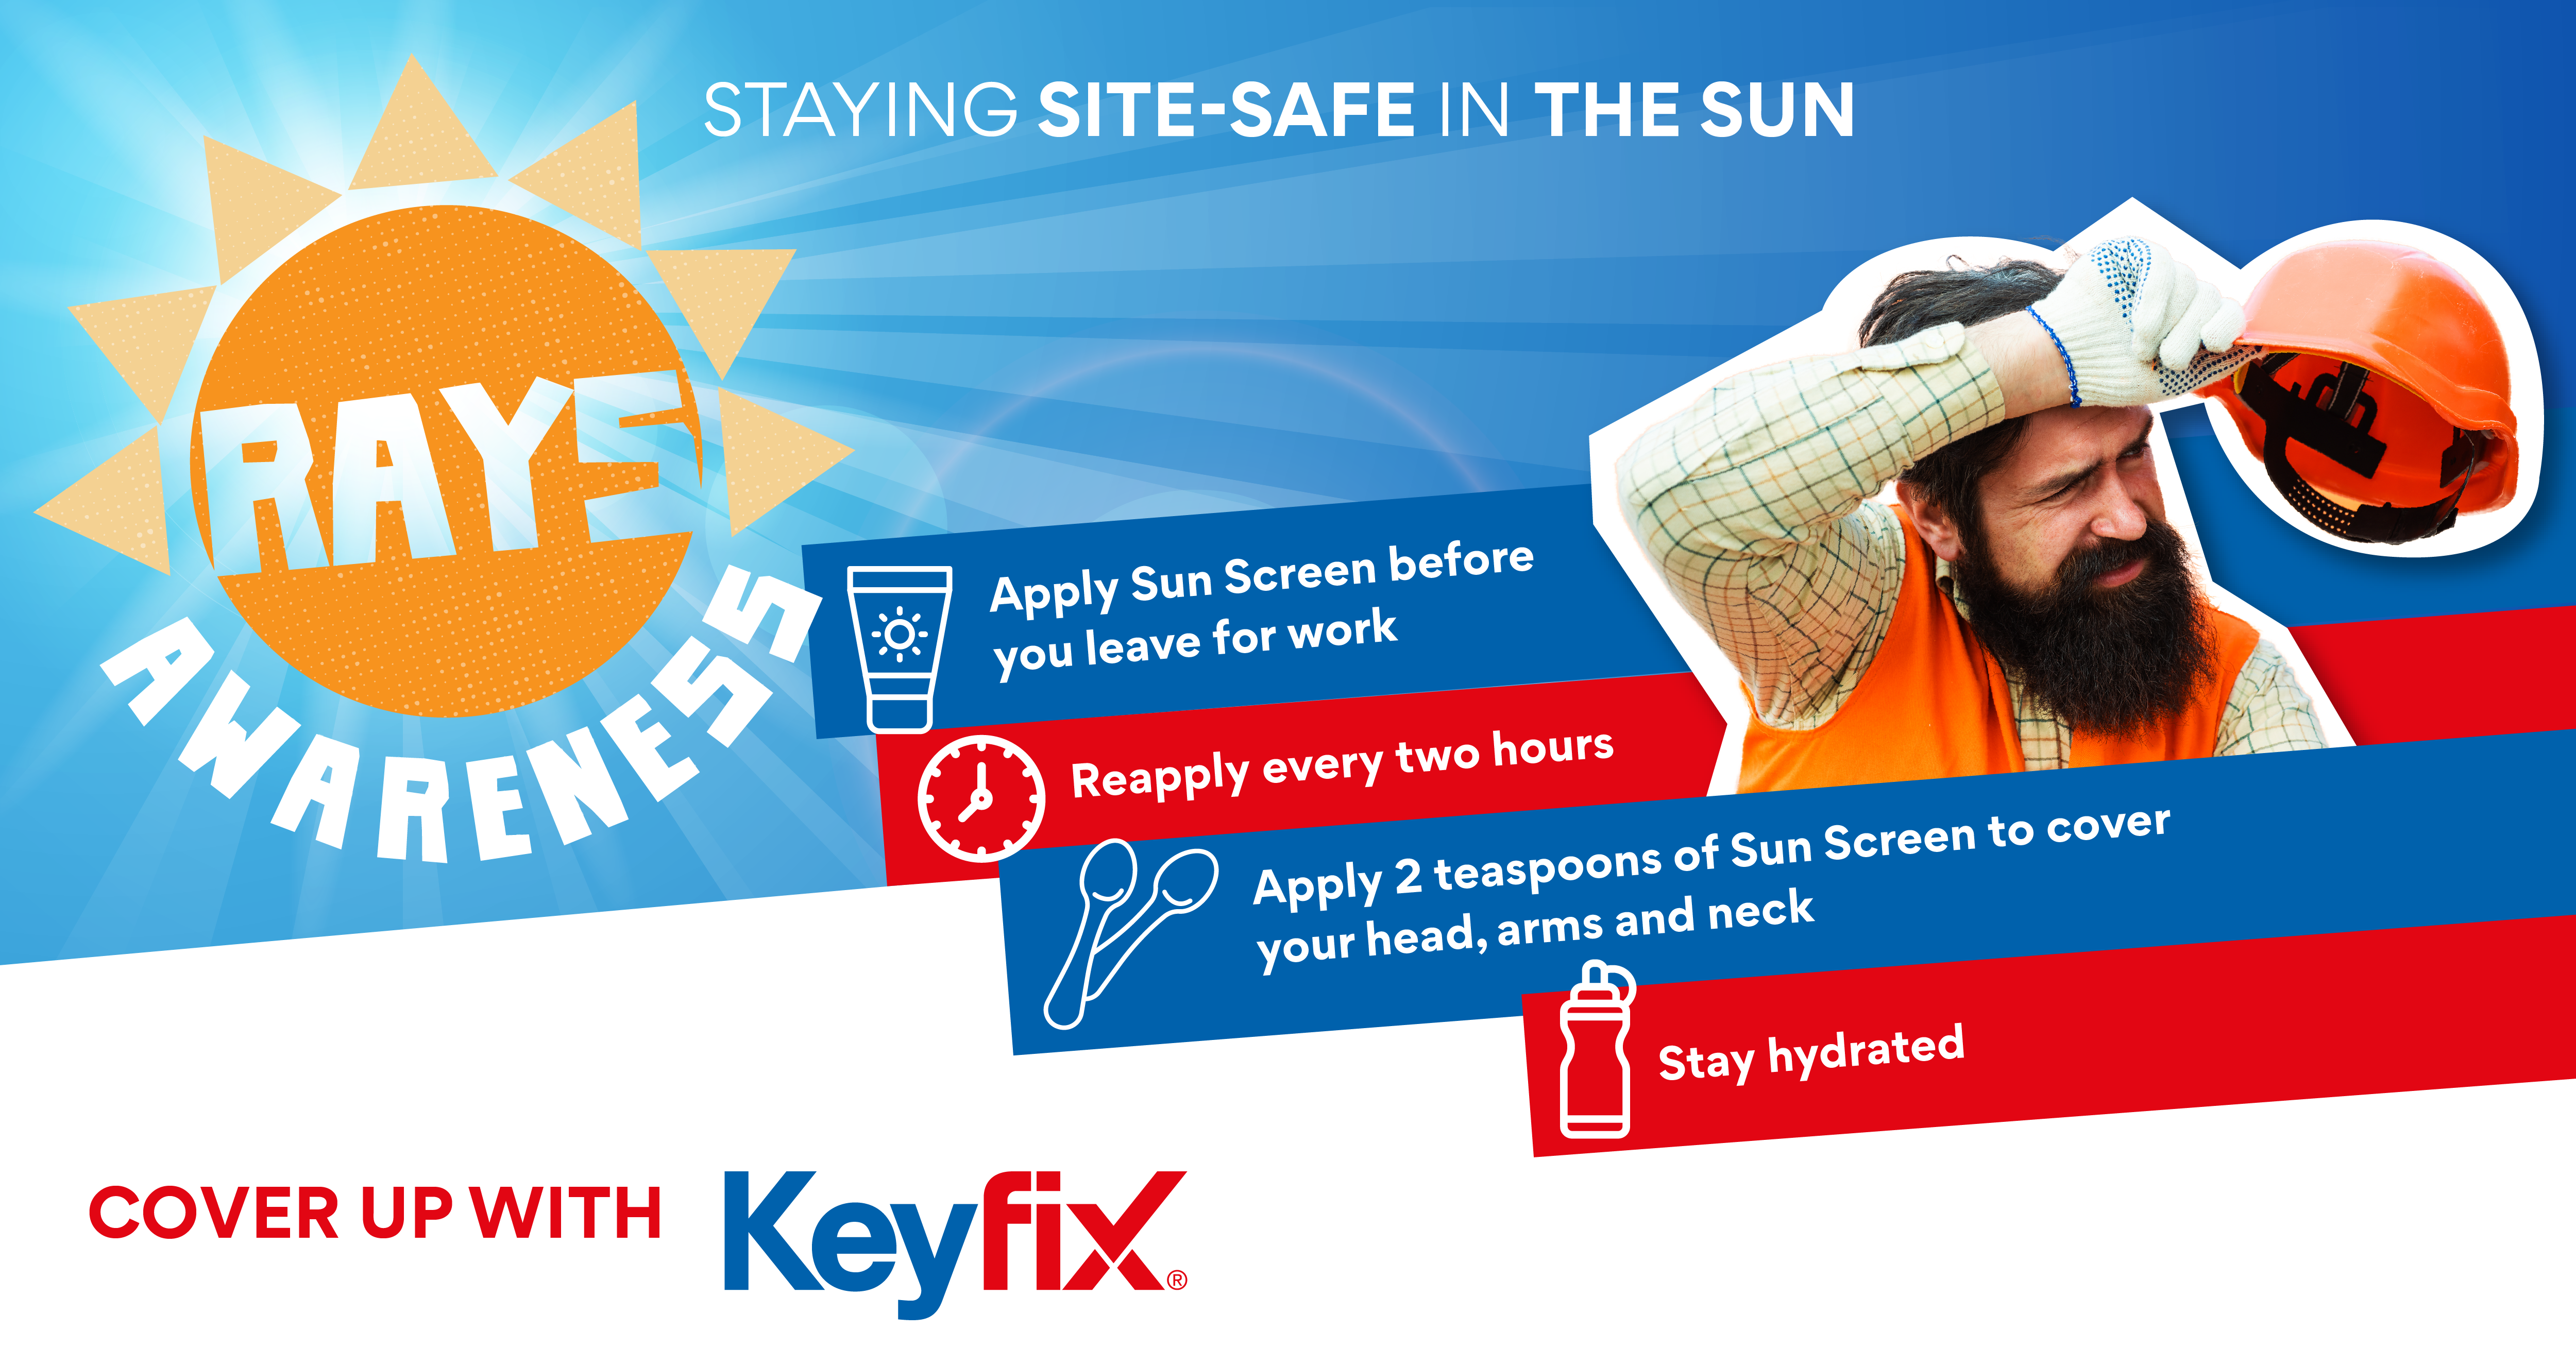 Keyfix launches Skin Cancer Awareness Campaign with Competition